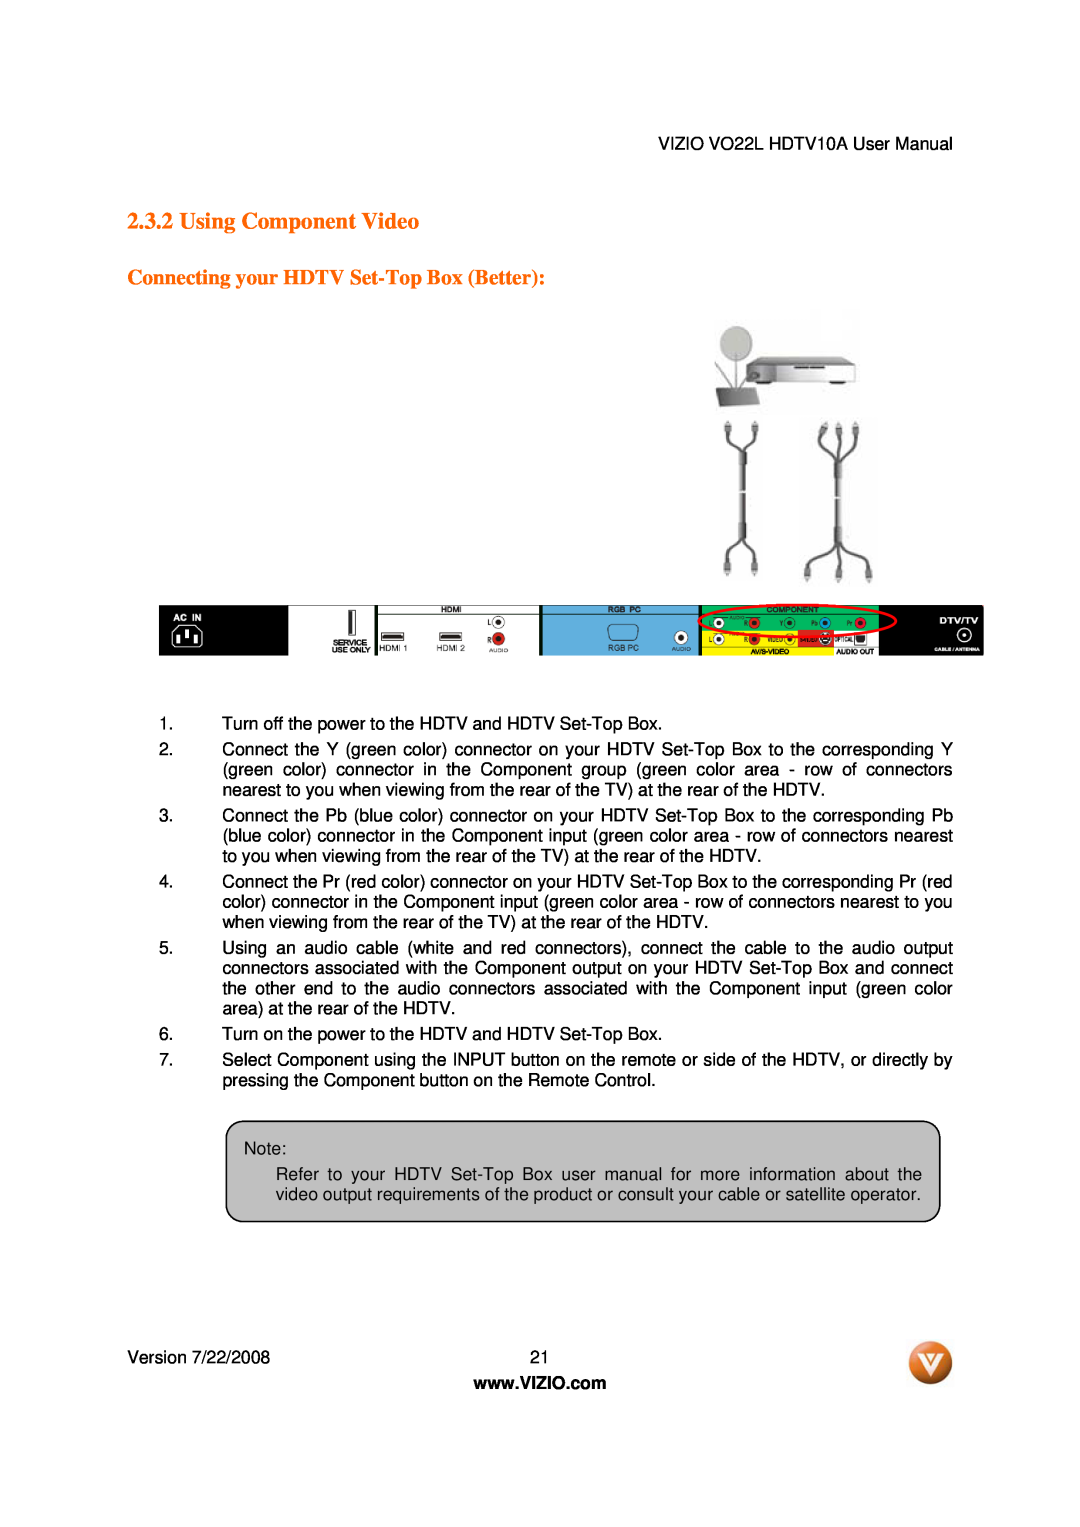 Vizio VO22L user manual Using Component Video, Connecting your HDTV Set-Top Box Better 